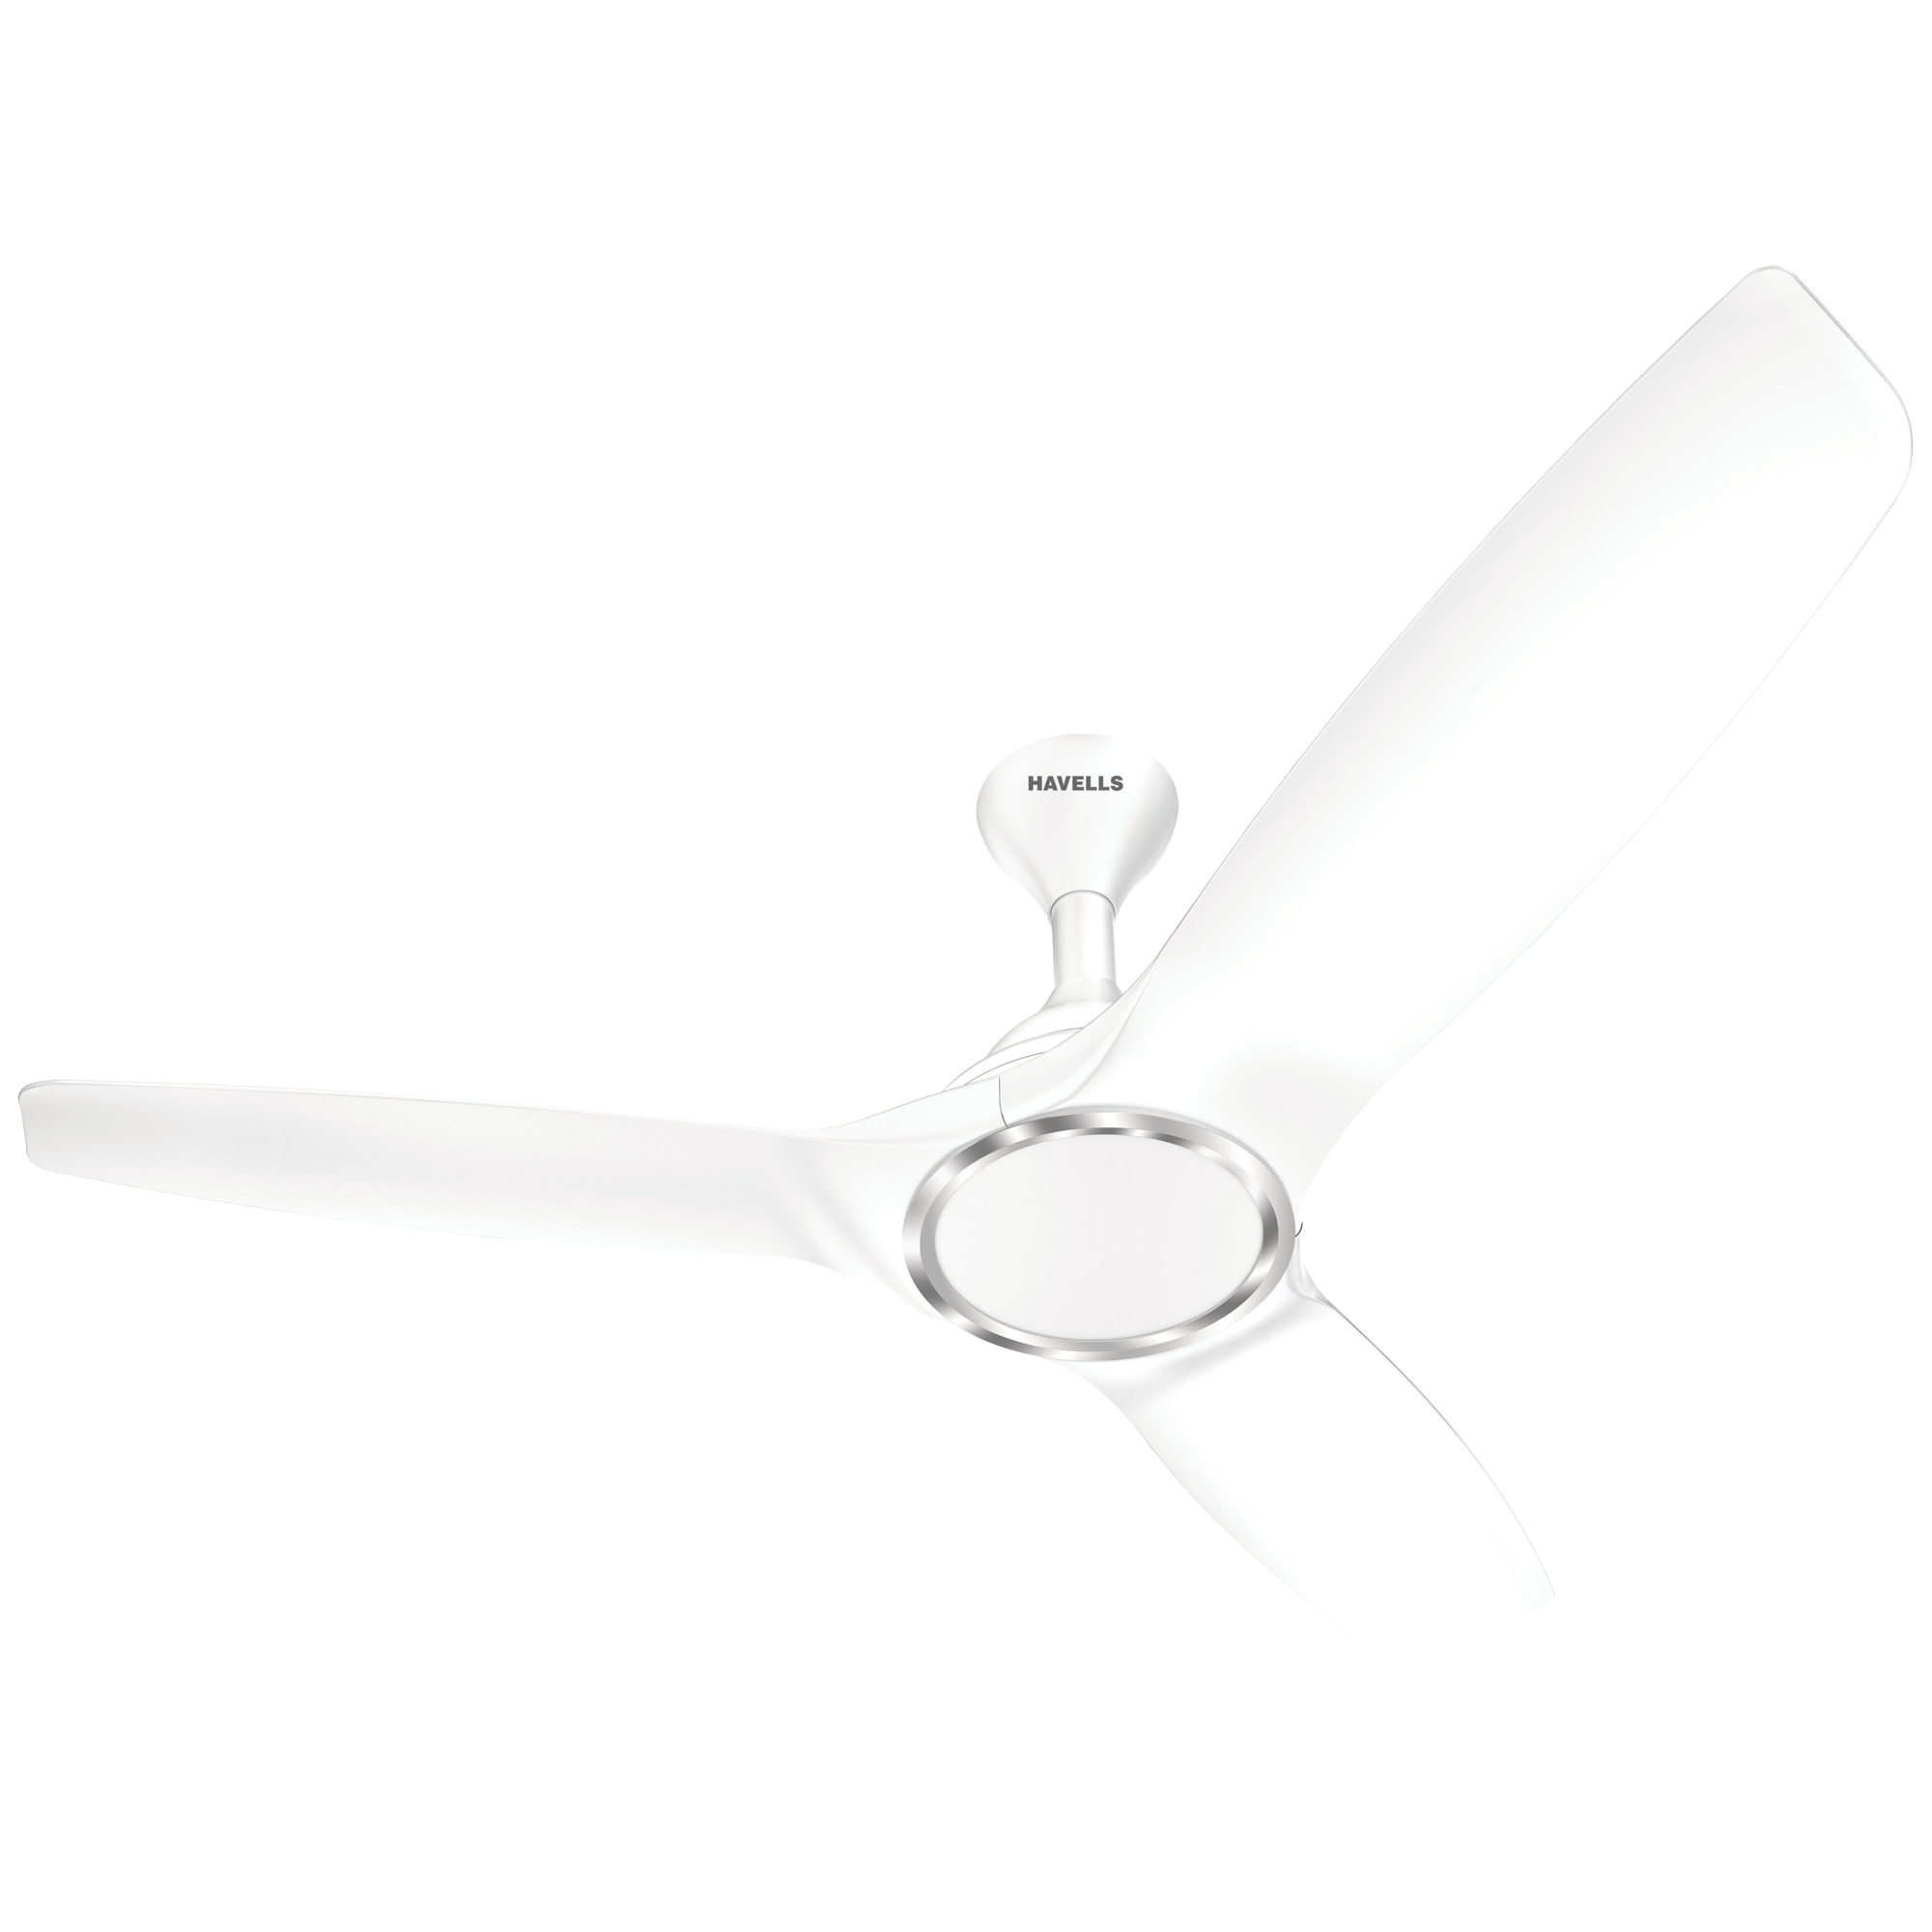 Havells Stealth Underlight 125cm Sweep 3 Blade Ceiling Fan (Inverter Compatibility, FHCSYULPWT48, Pearl White)_1